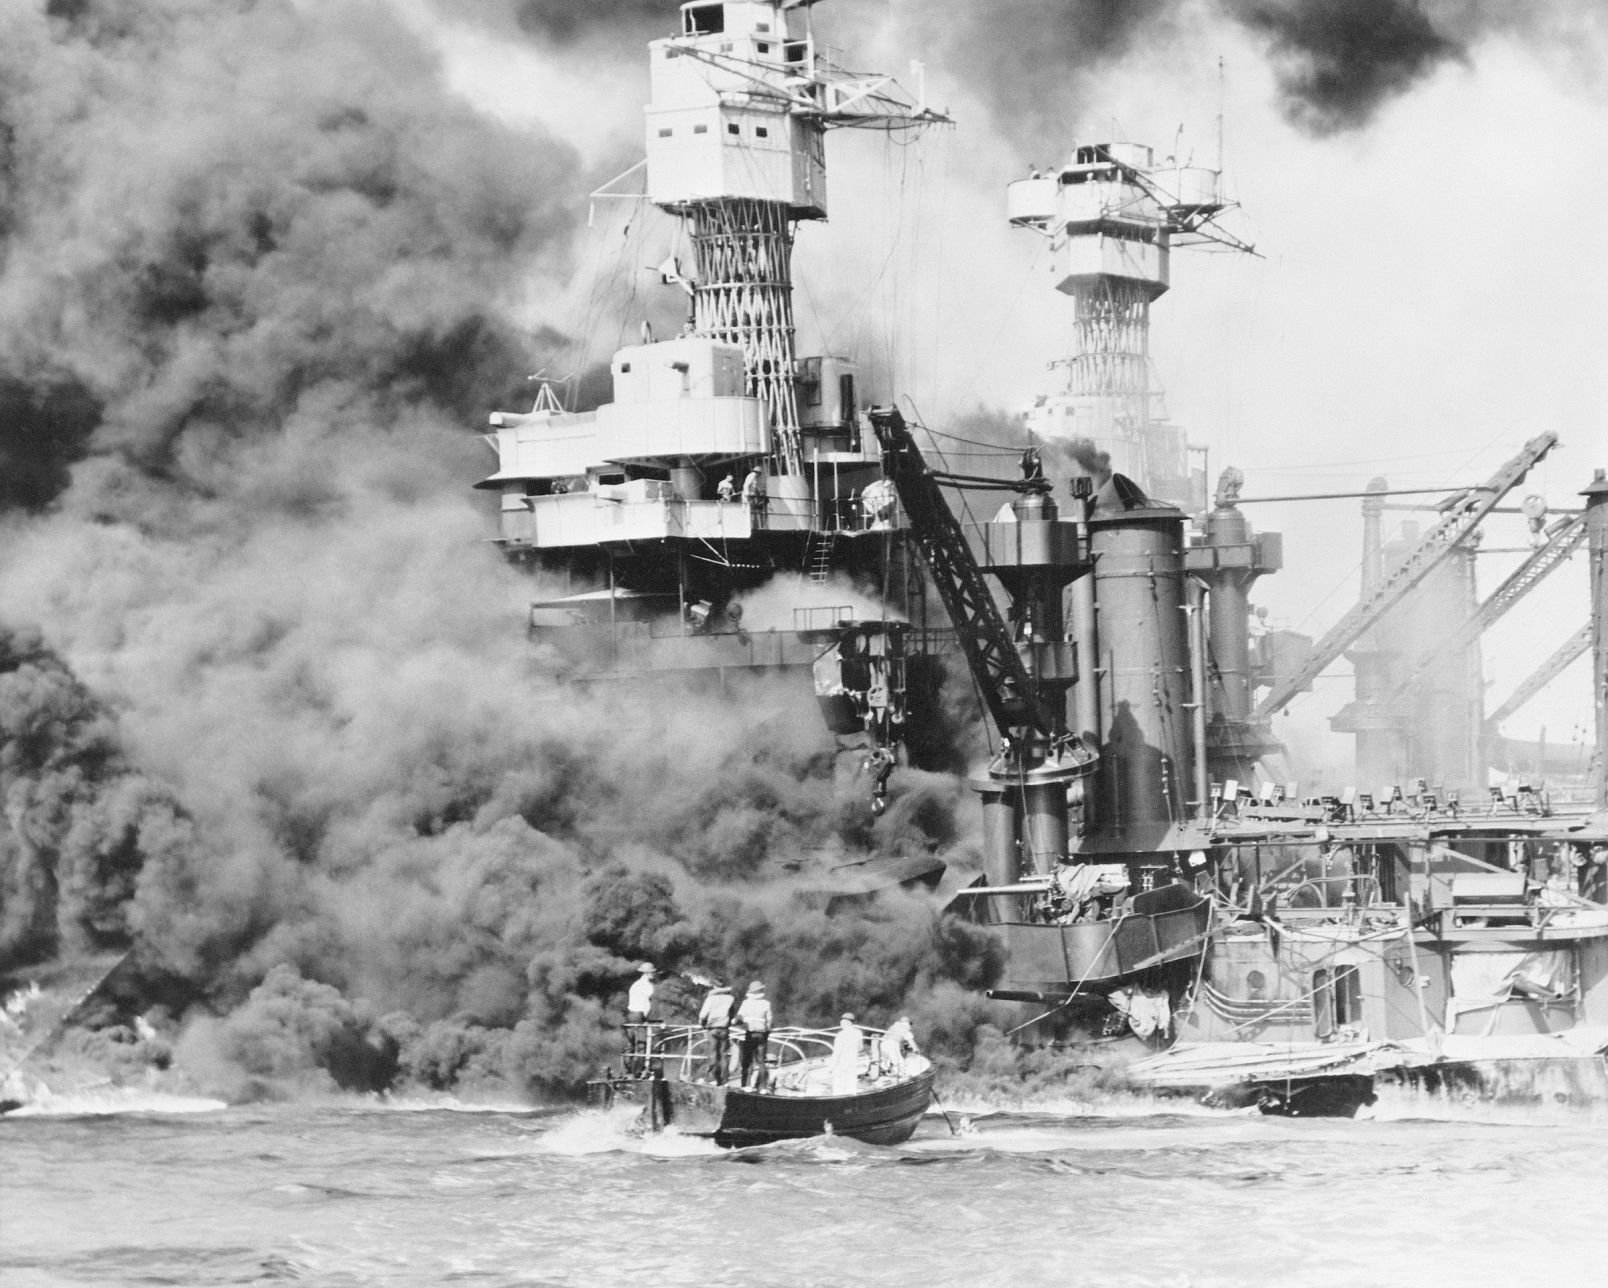 Sailors attempt to put out fires on USS West Virginia Pearl Harbor Photo Print